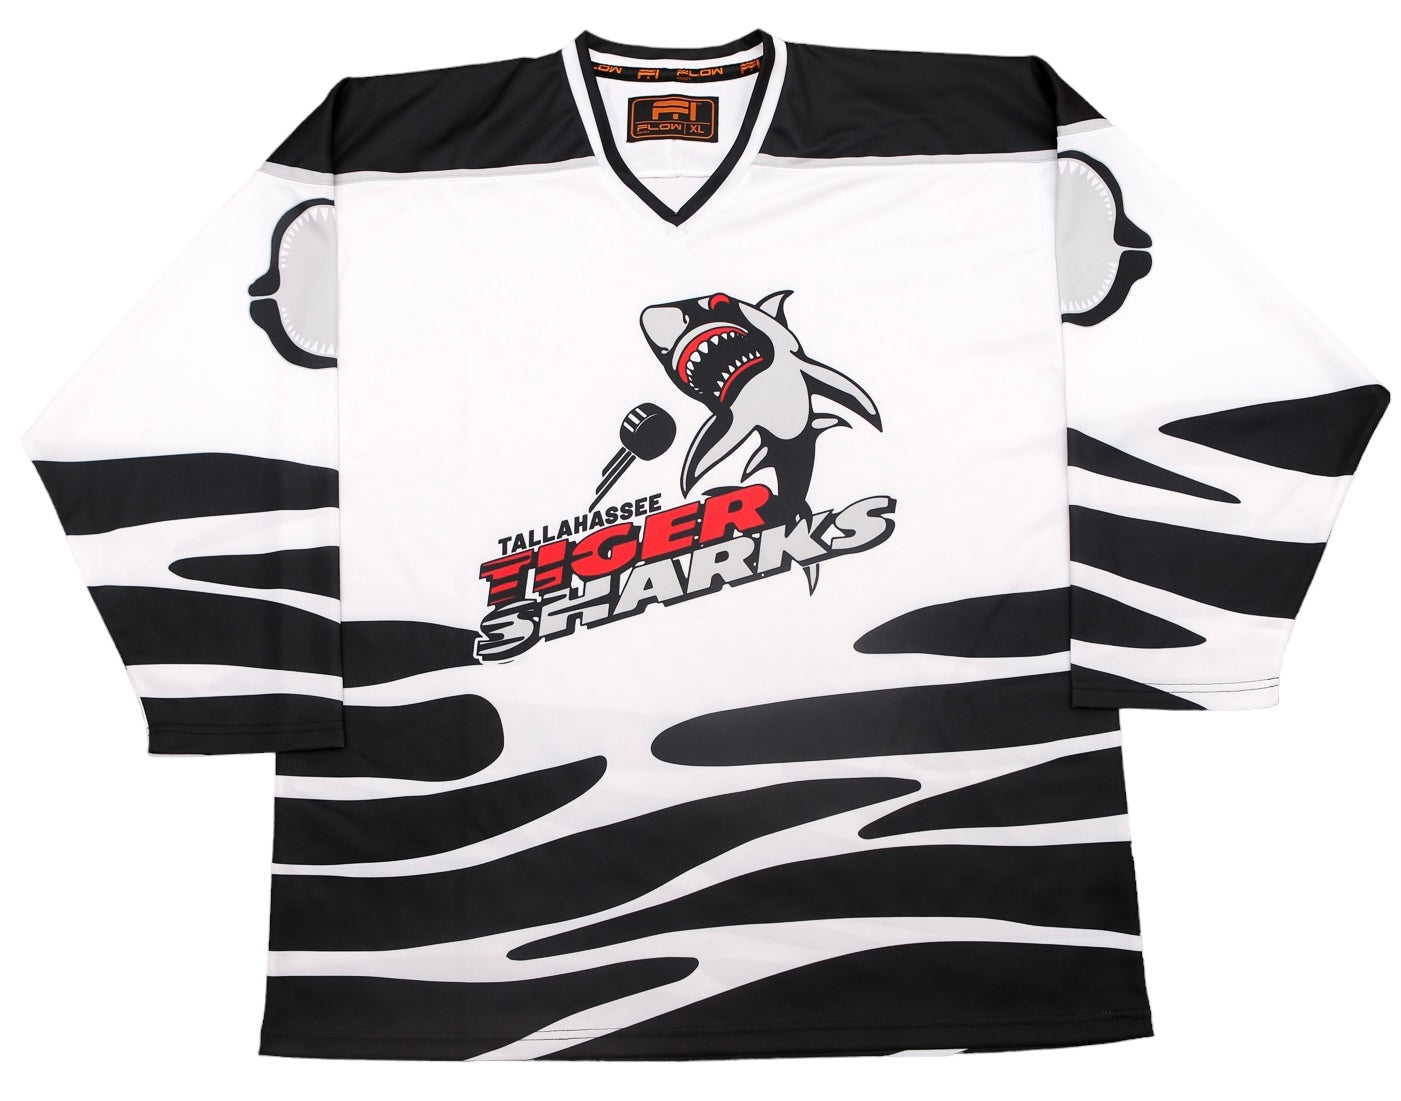 Tallahasse Tiger Sharks™ White Jersey (BLANK - PRE ORDER)